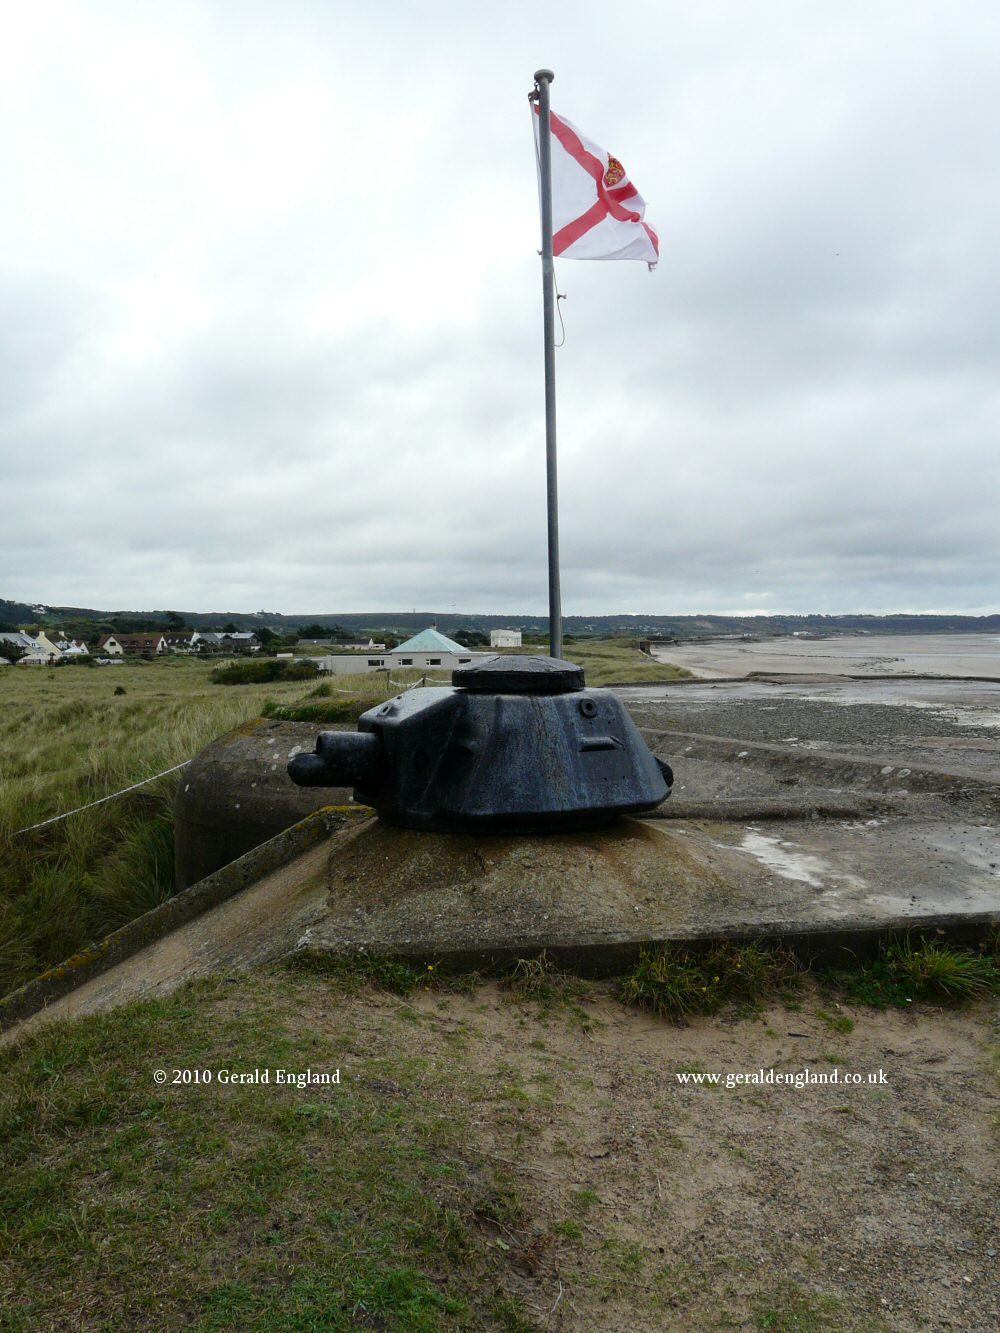 Les Laveurs: Above the Channel Islands Military Museum